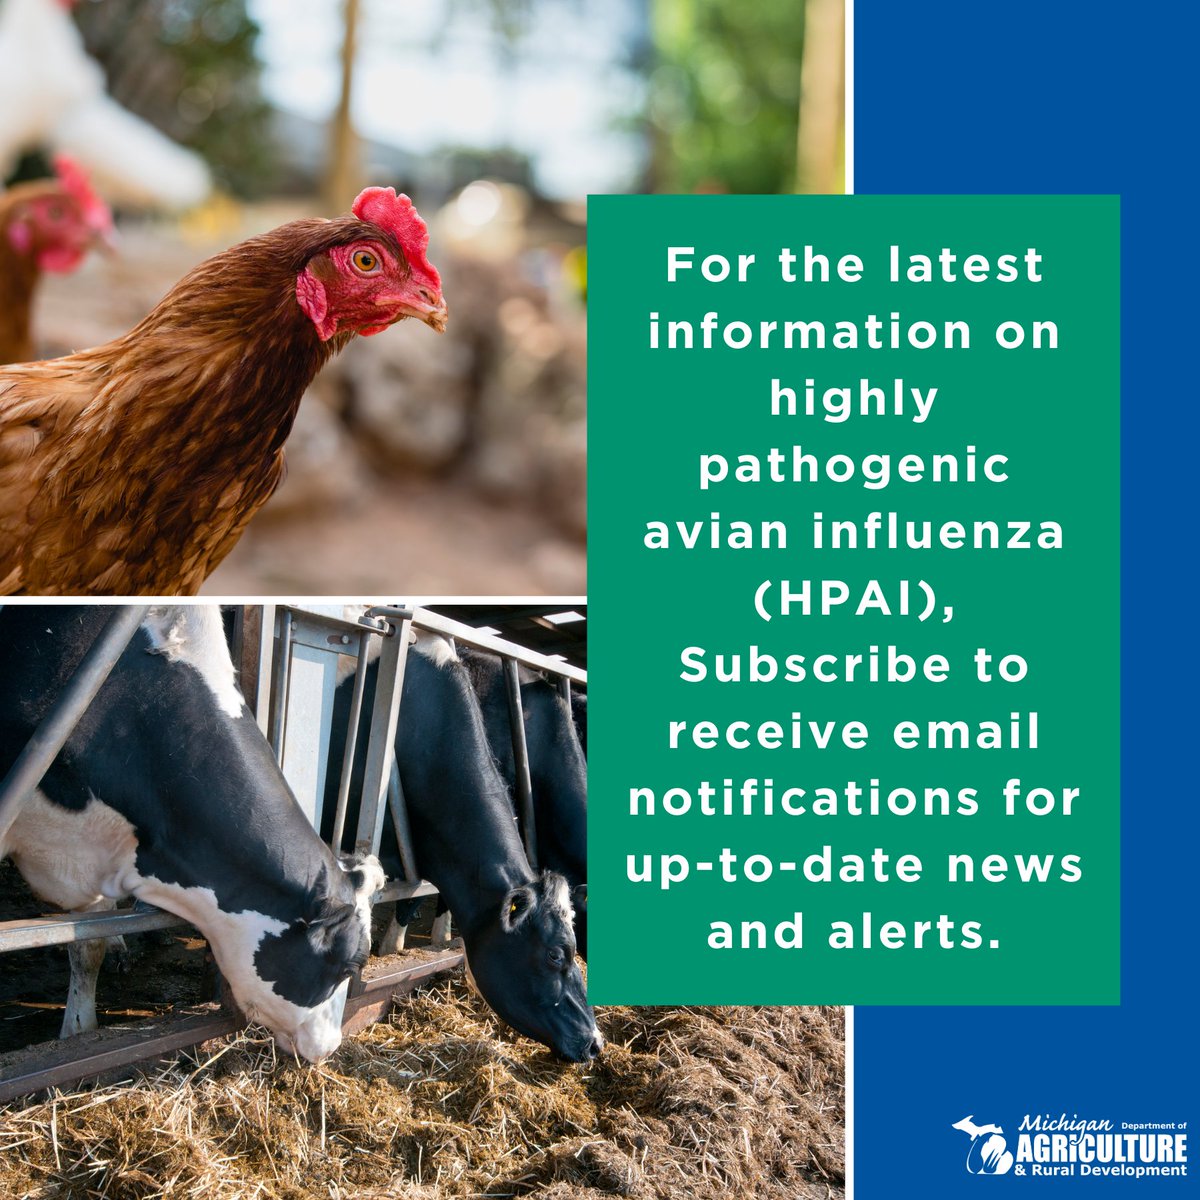 Looking for the latest information on #BirdFlu in Michigan? Subscribe below to receive email notifications with the most up-to-date news and alerts. bit.ly/3xYtJD0